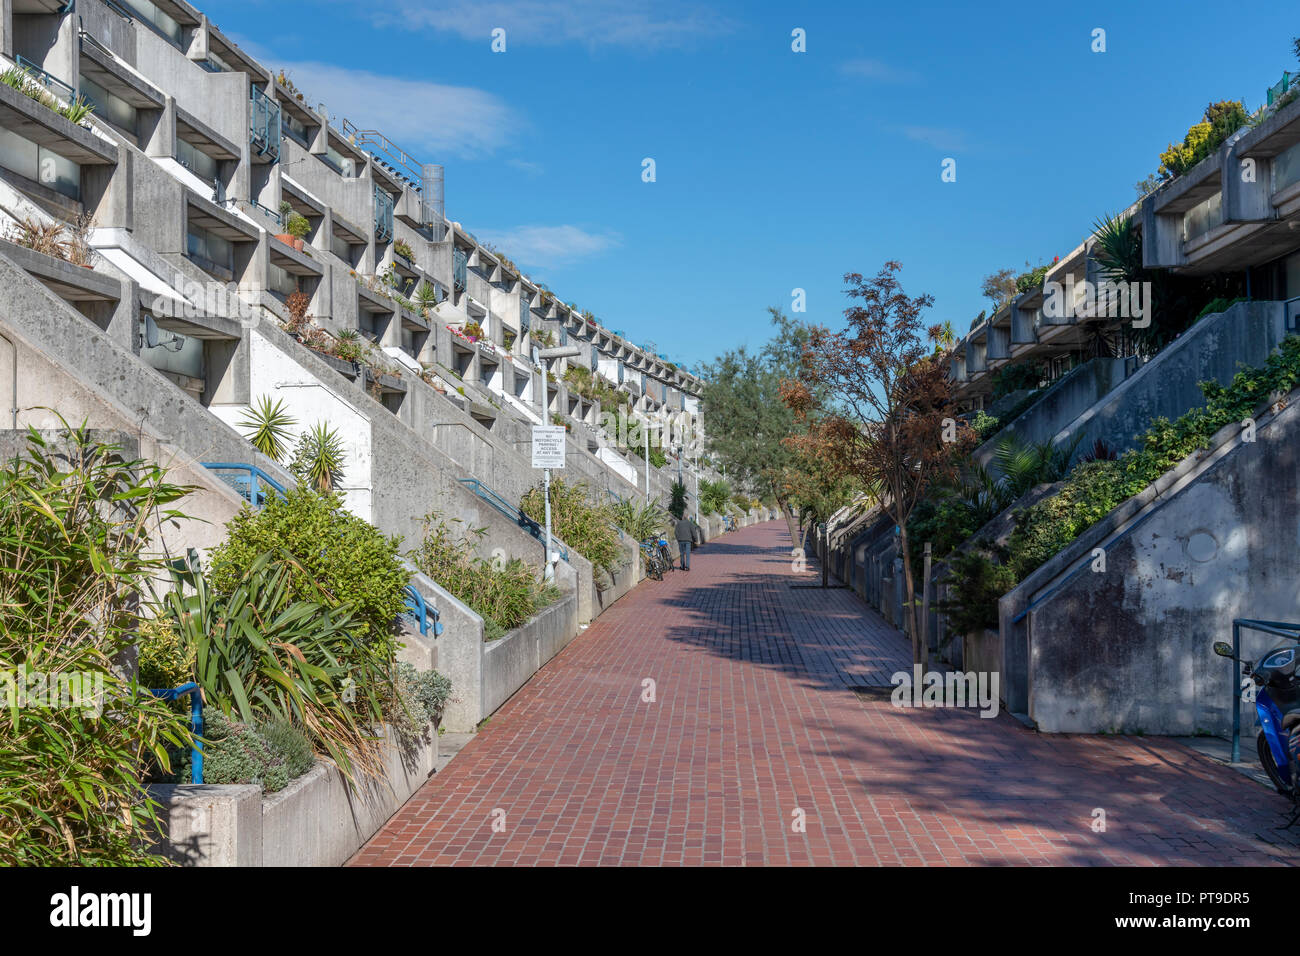 Alexandra Road Estate (also known as Rowley Way) Camden. Designed by the architect Neave Brown. Brutalist but low enough to be on a human scale. Stock Photo